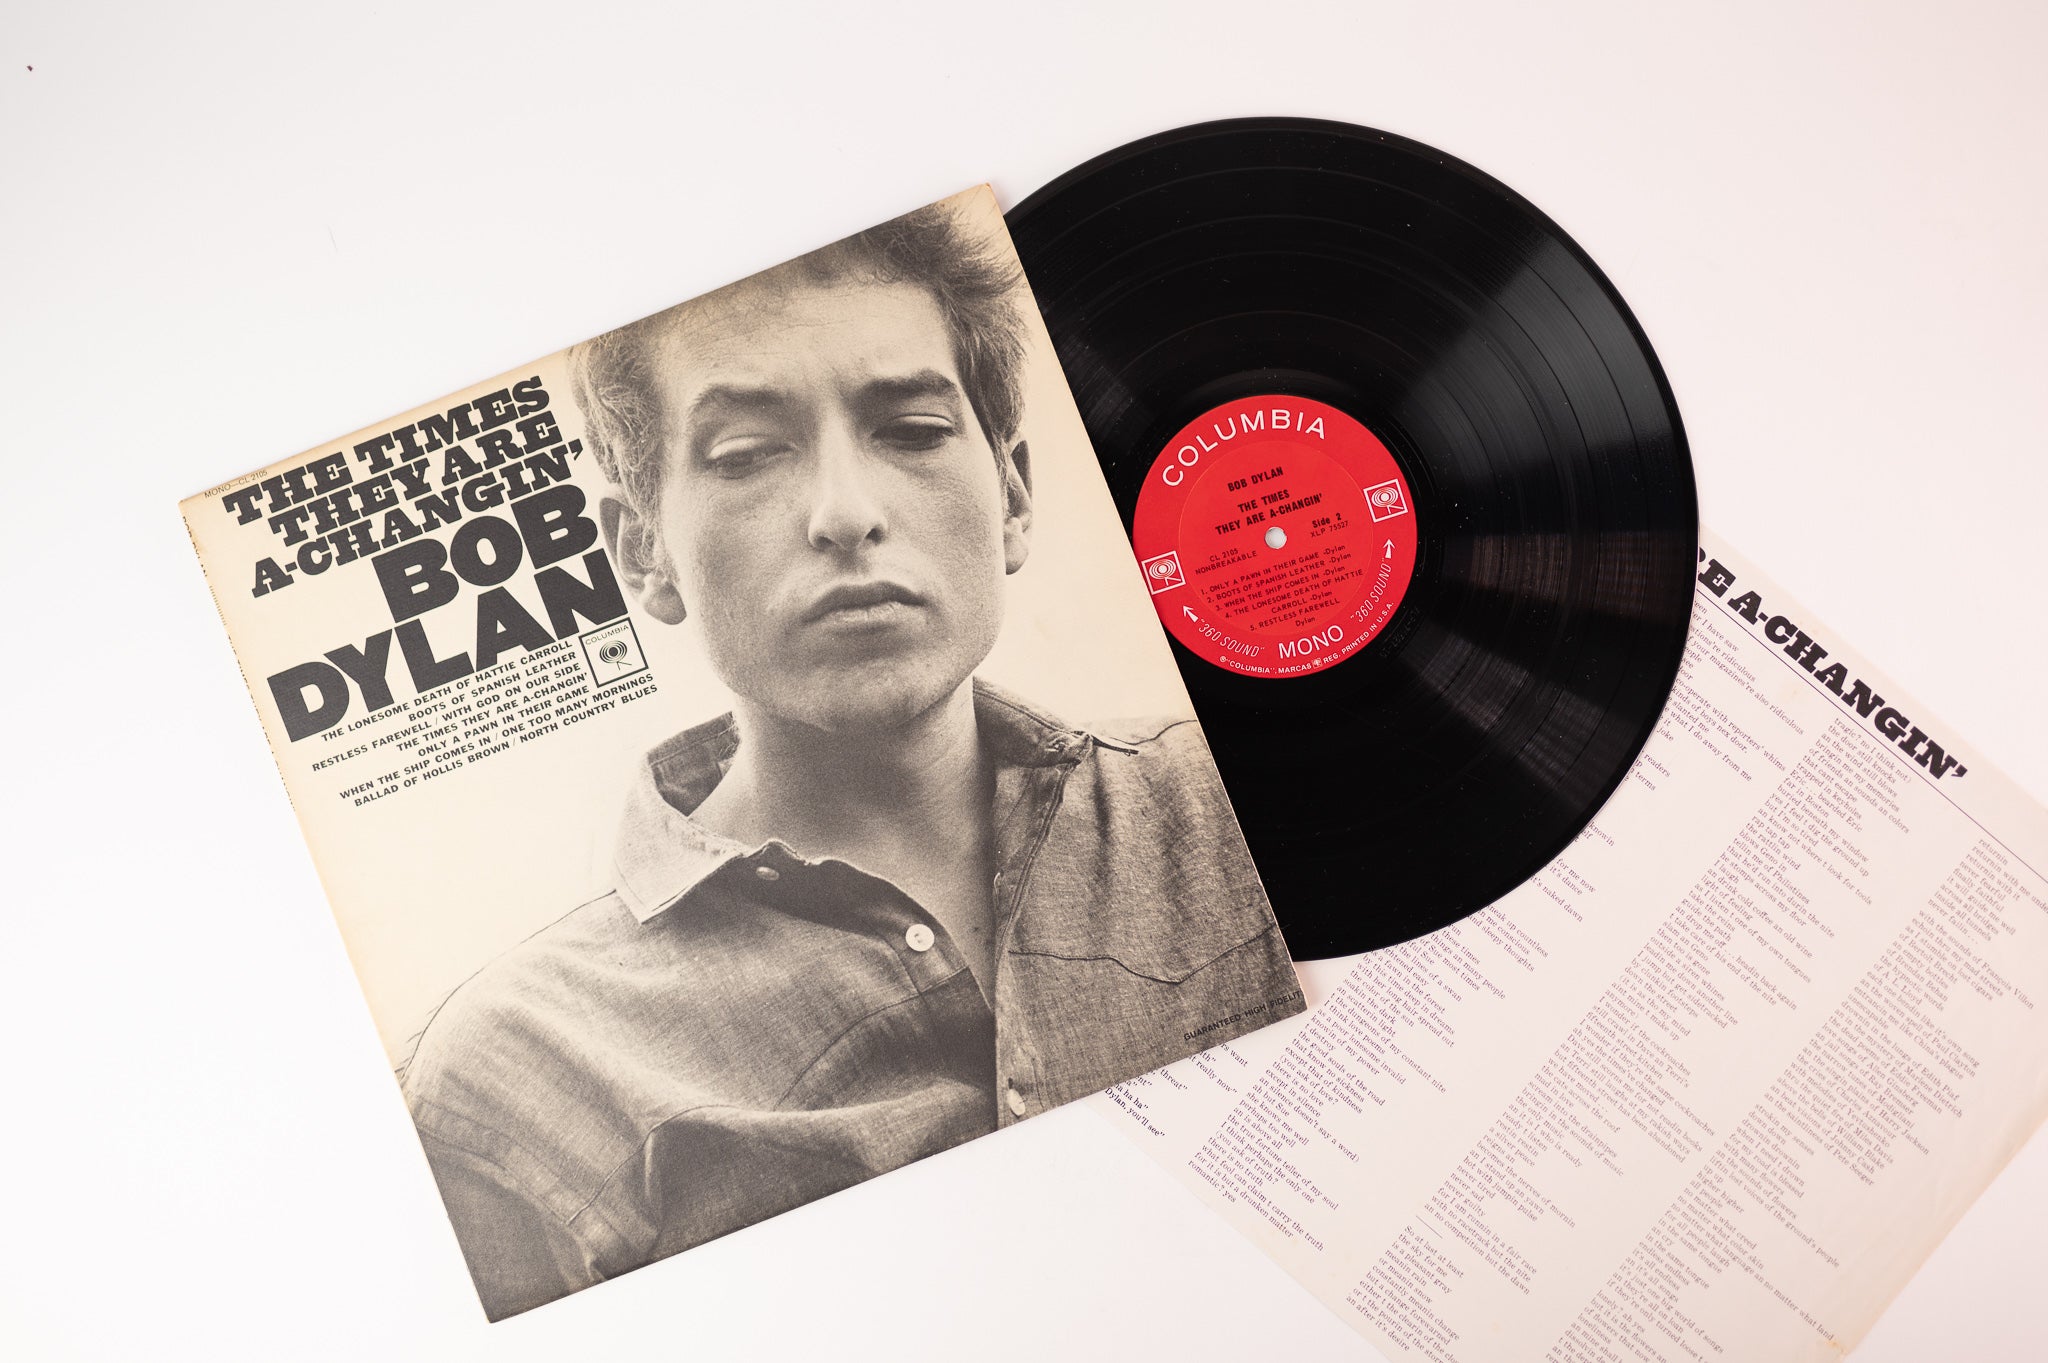 Bob Dylan - The Times They Are A-Changin' on Columbia - Mono 2-eye Pressing